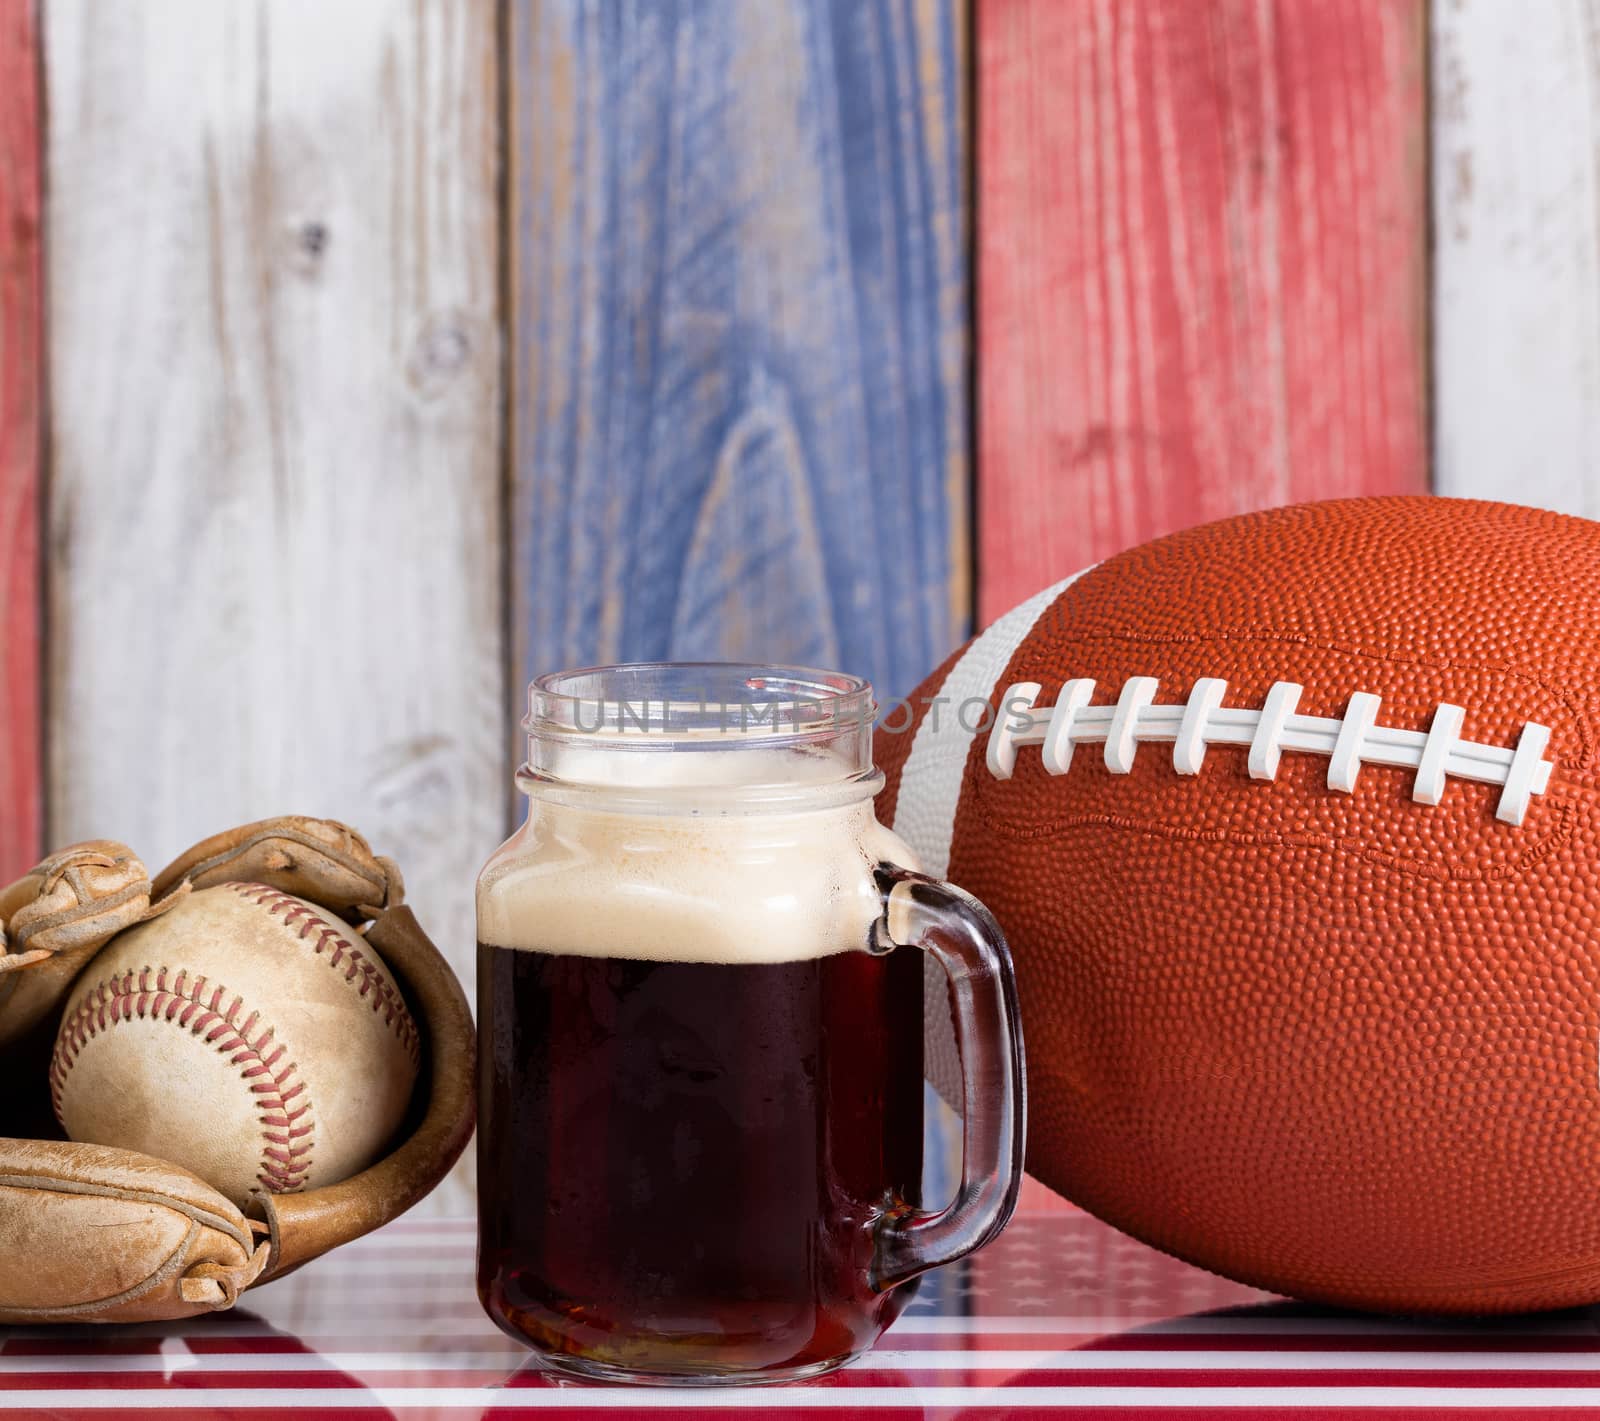 Beer and American sports objects with faded wooden boards painte by tab1962